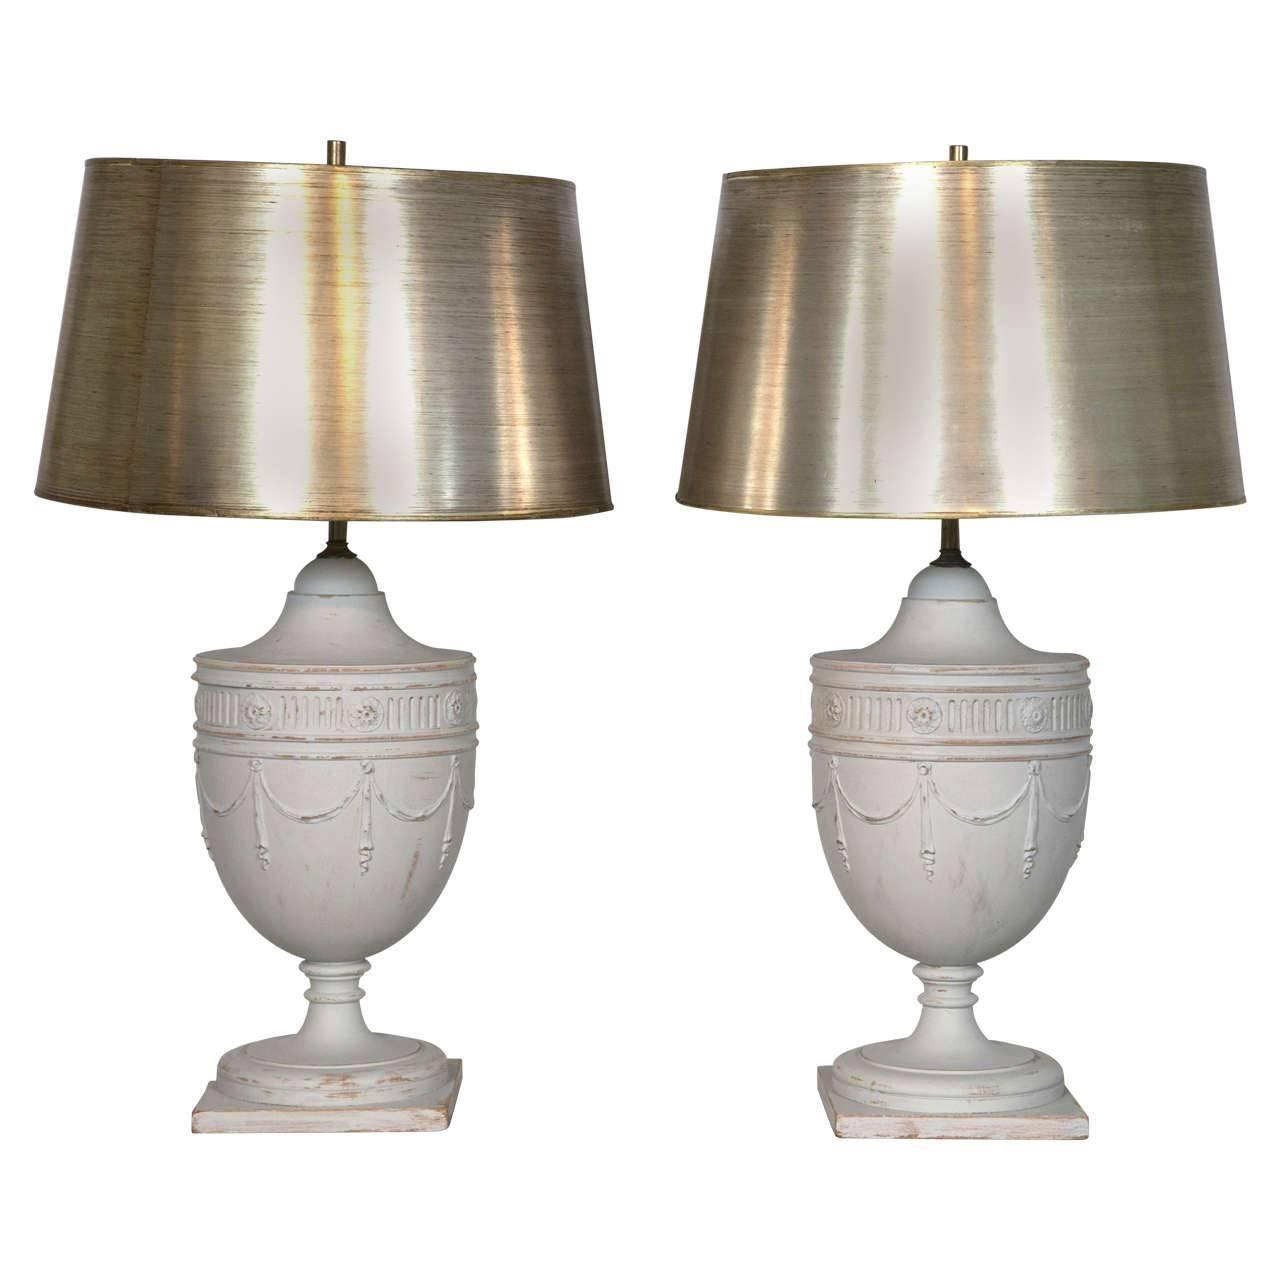 Pair of Neoclassical Style Urn Lamps